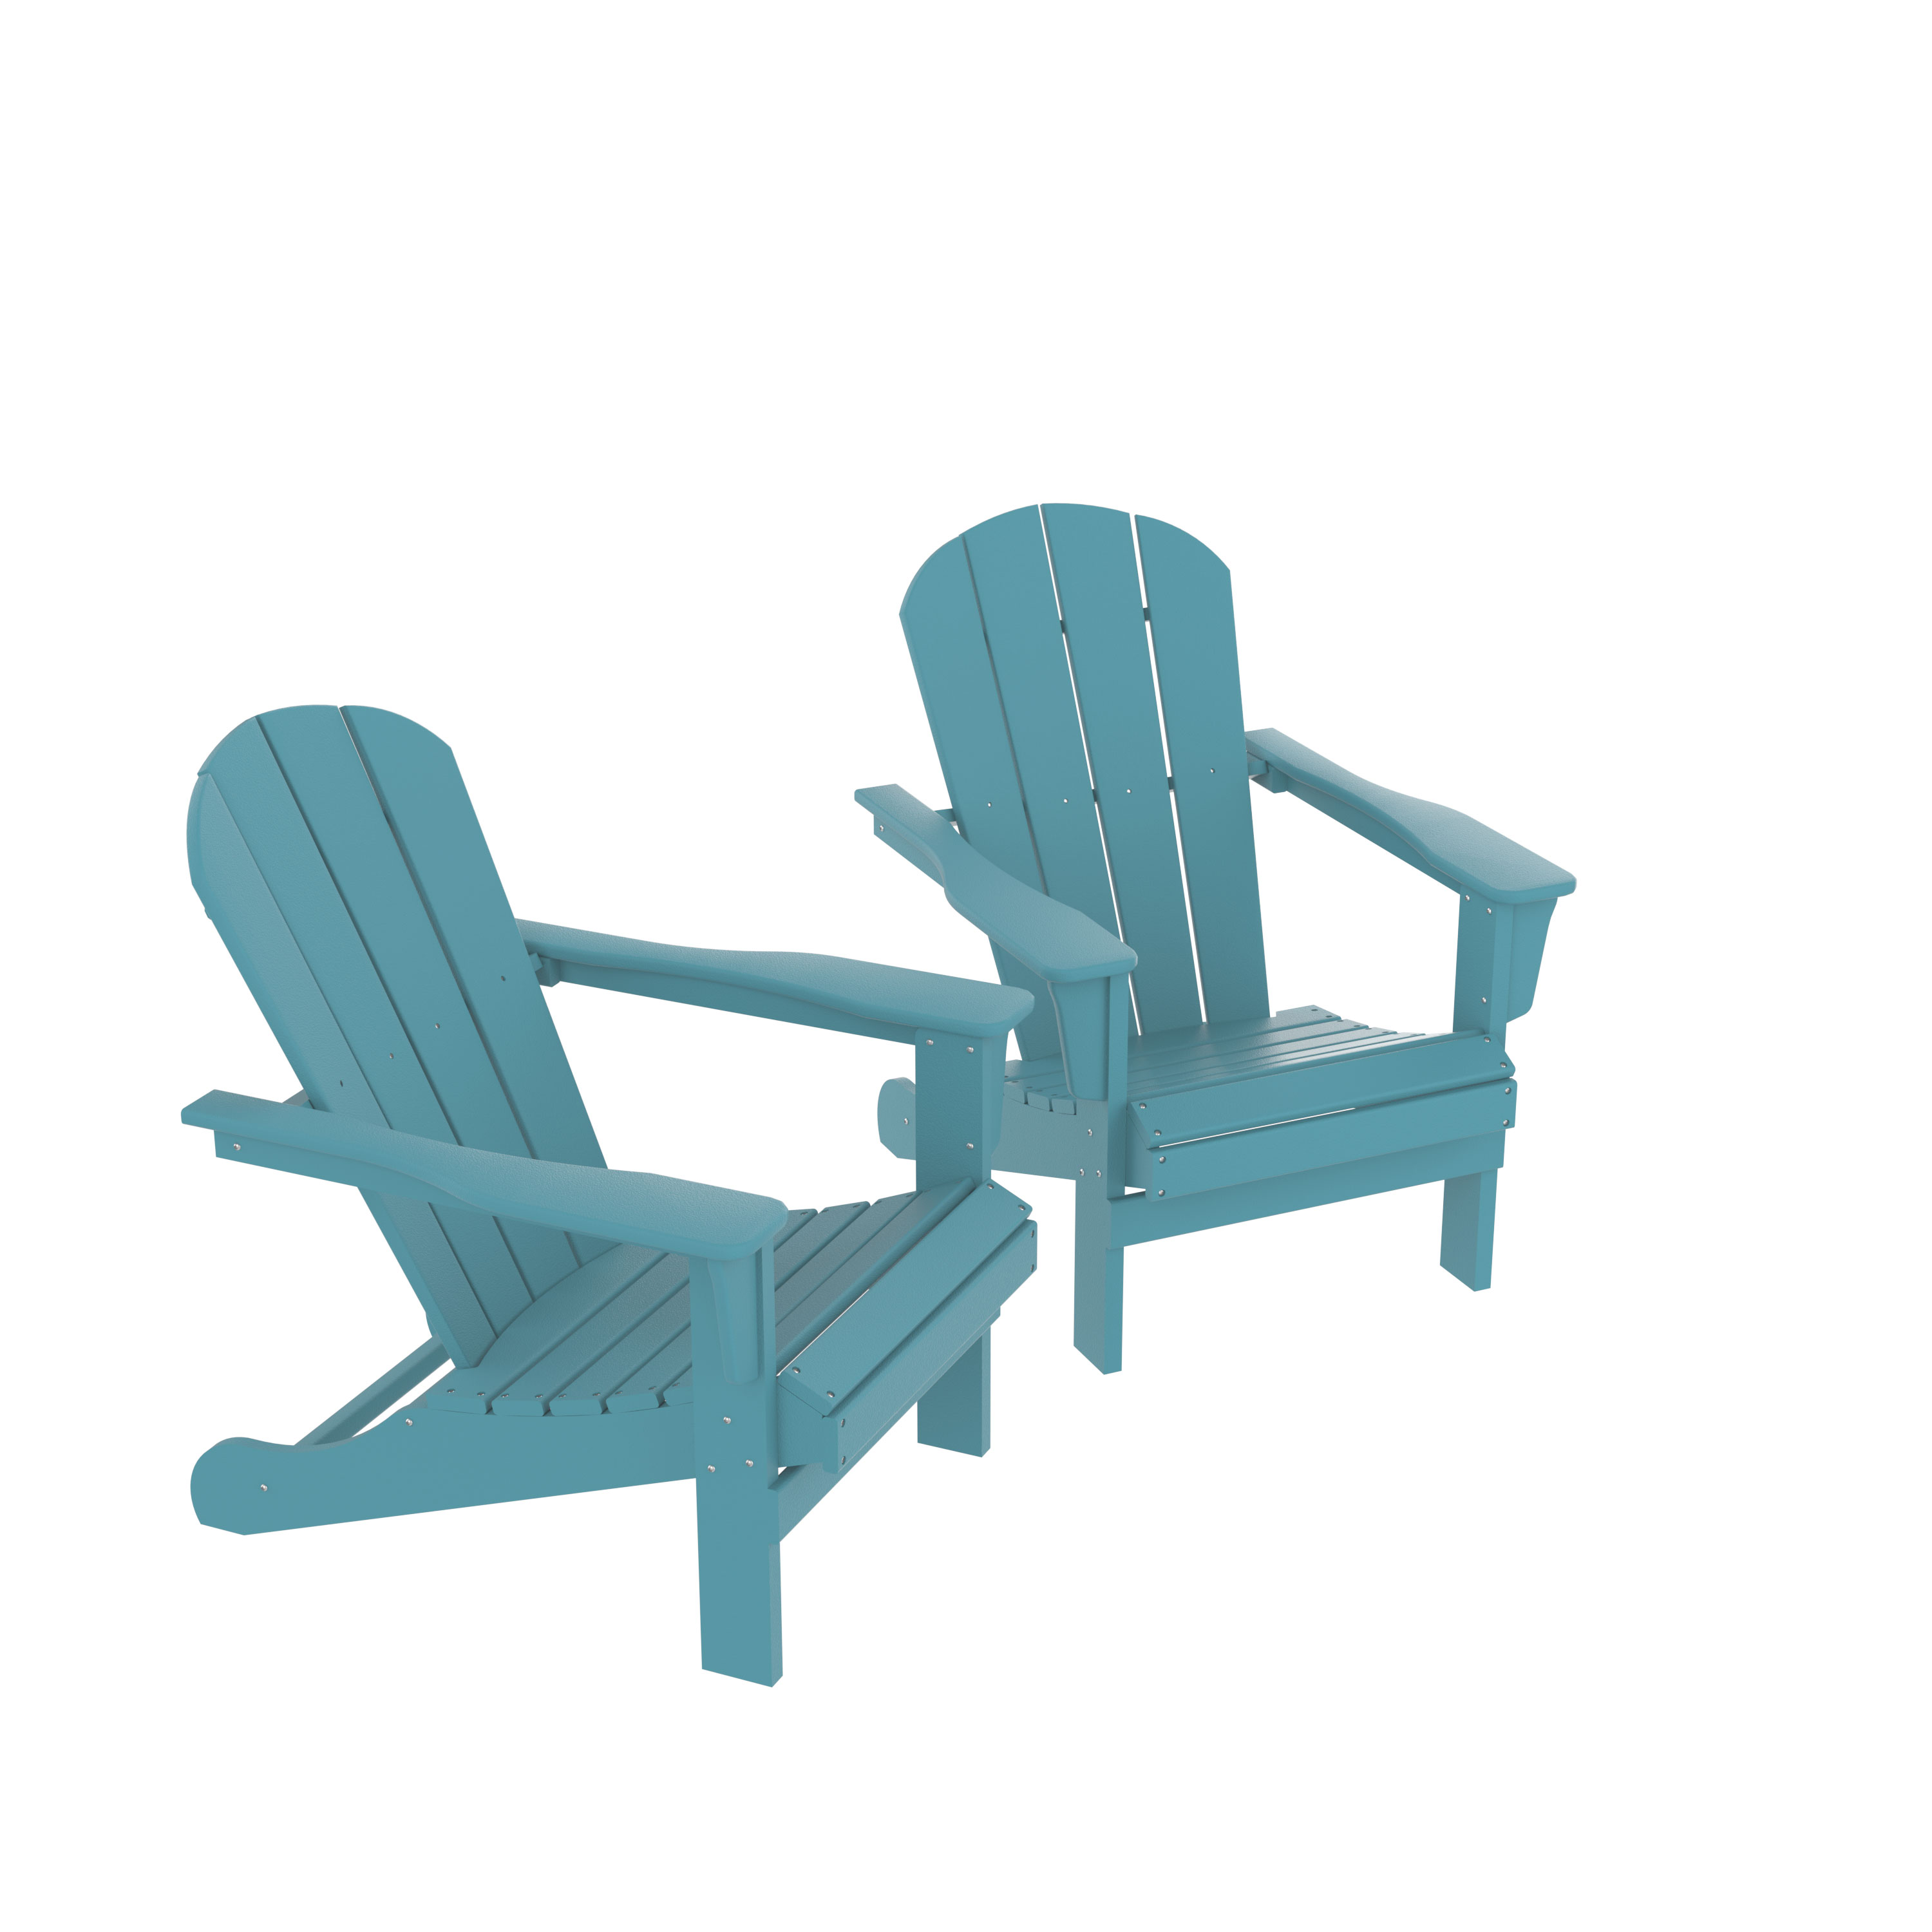 Clearance! HDPE Adirondack Chair, Fire Pit Chairs, Sand Chair, Patio Outdoor Chairs,DPE Plastic Resin Deck Chair, lawn chairs, Adult Size ,Weather Resistant for Patio/ Backyard/Garden ,Set of 2 - image 4 of 6